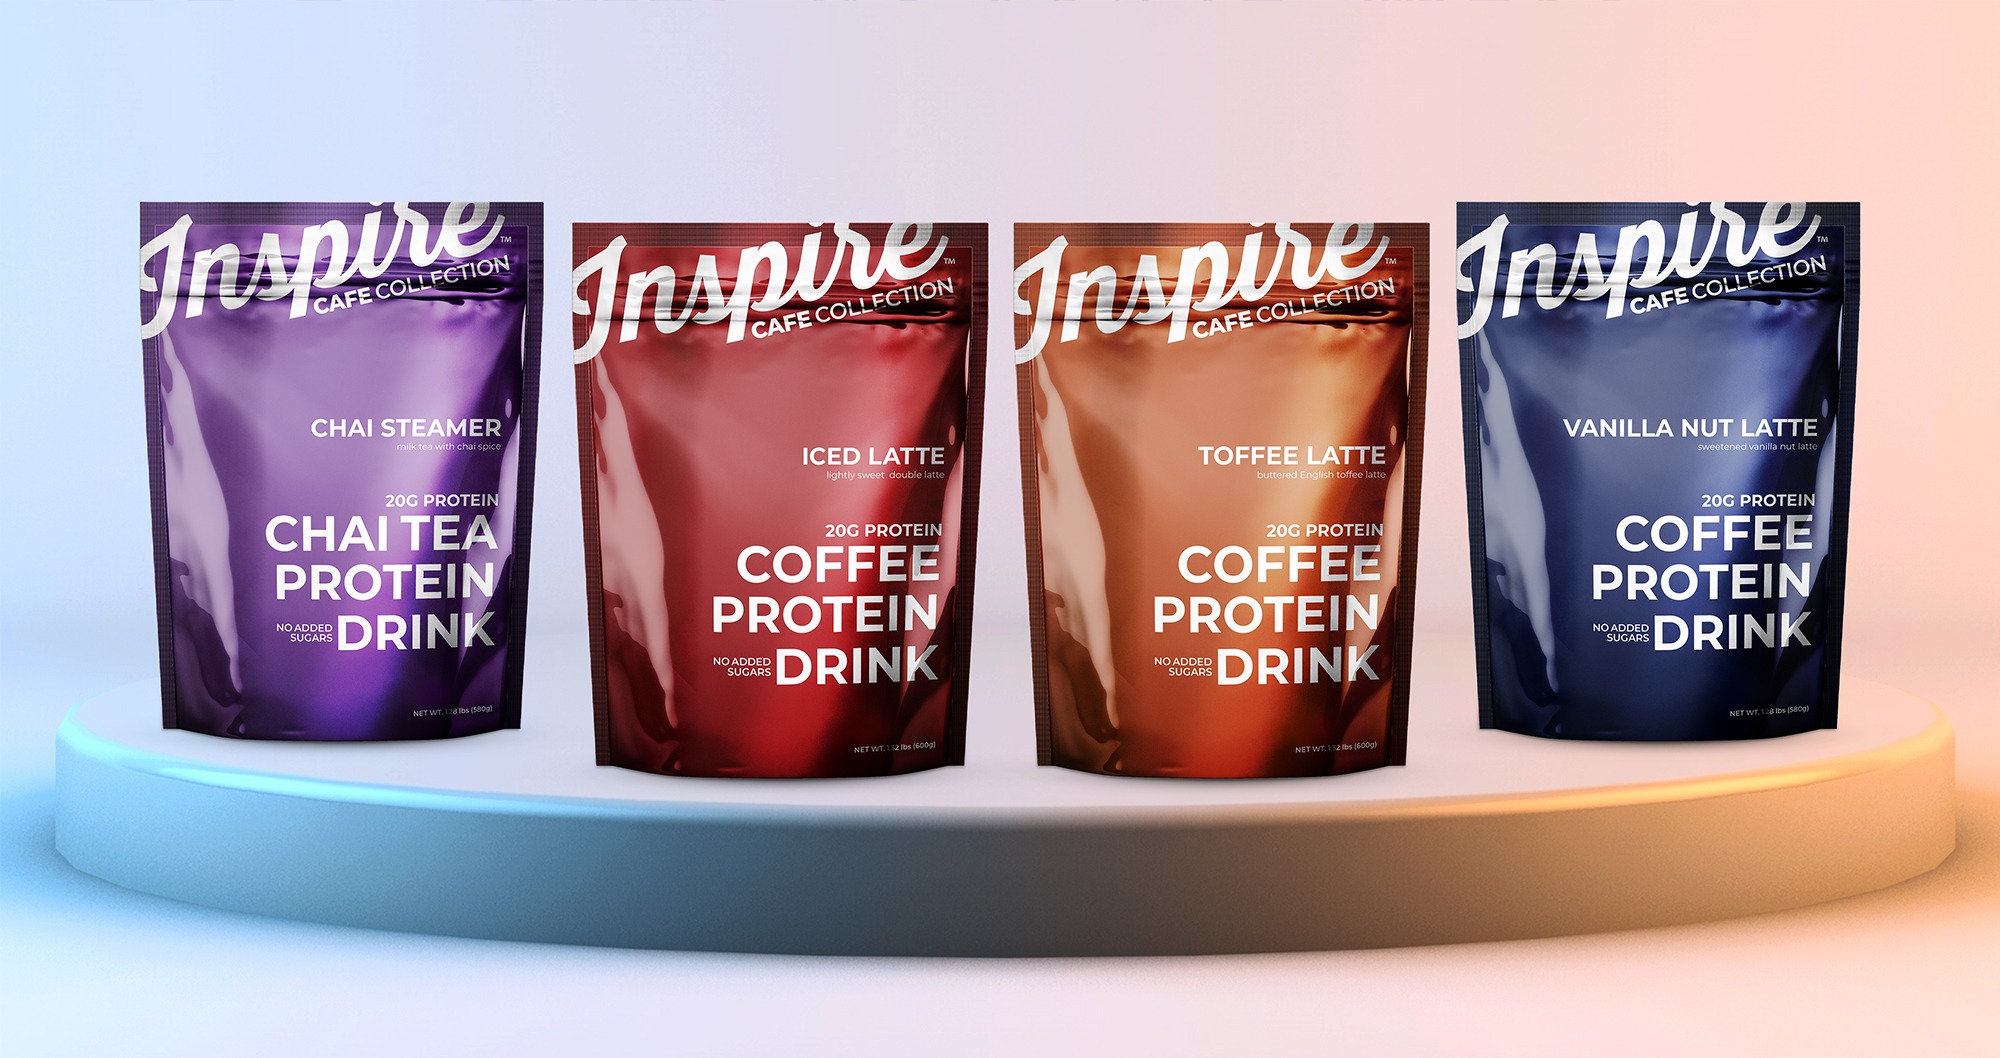 Inspire Cafe Collection Protein Powder Package Design by Octane Advertising Design.